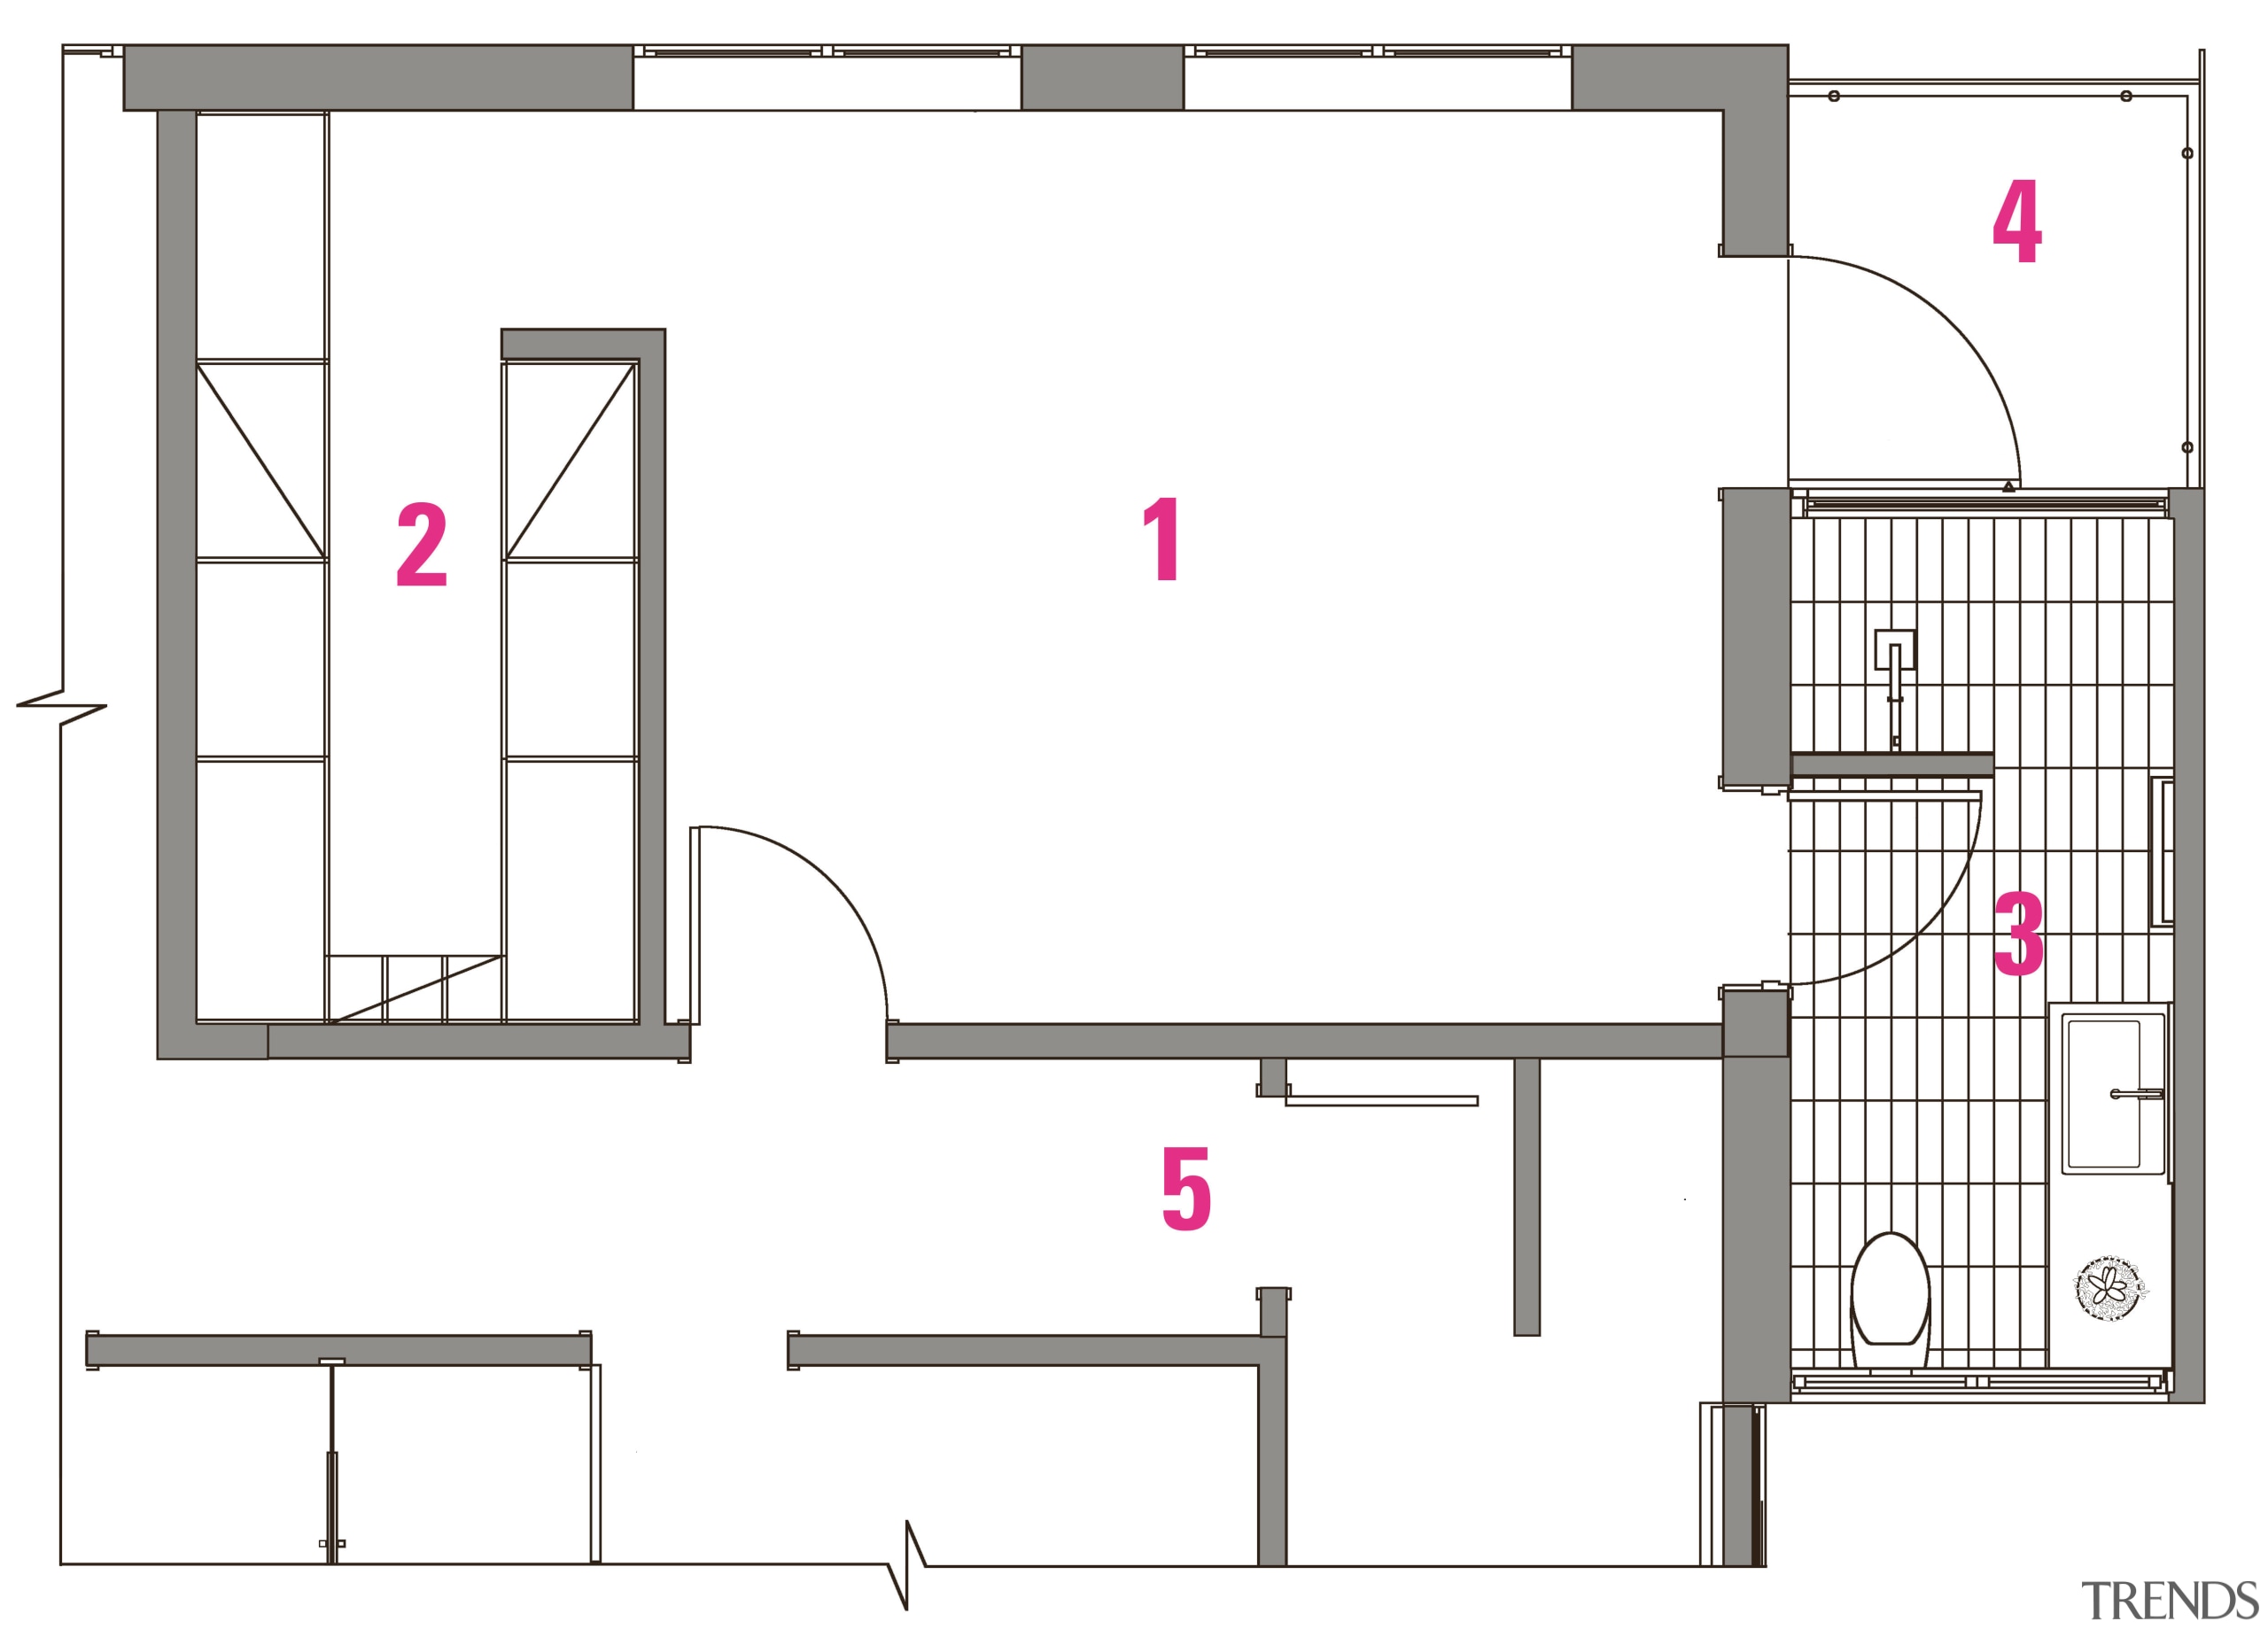 Legend: 1 master bedroom, 2 walk-in wardrobe, 3 angle, architecture, area, design, diagram, drawing, floor plan, line, product, product design, square, structure, white